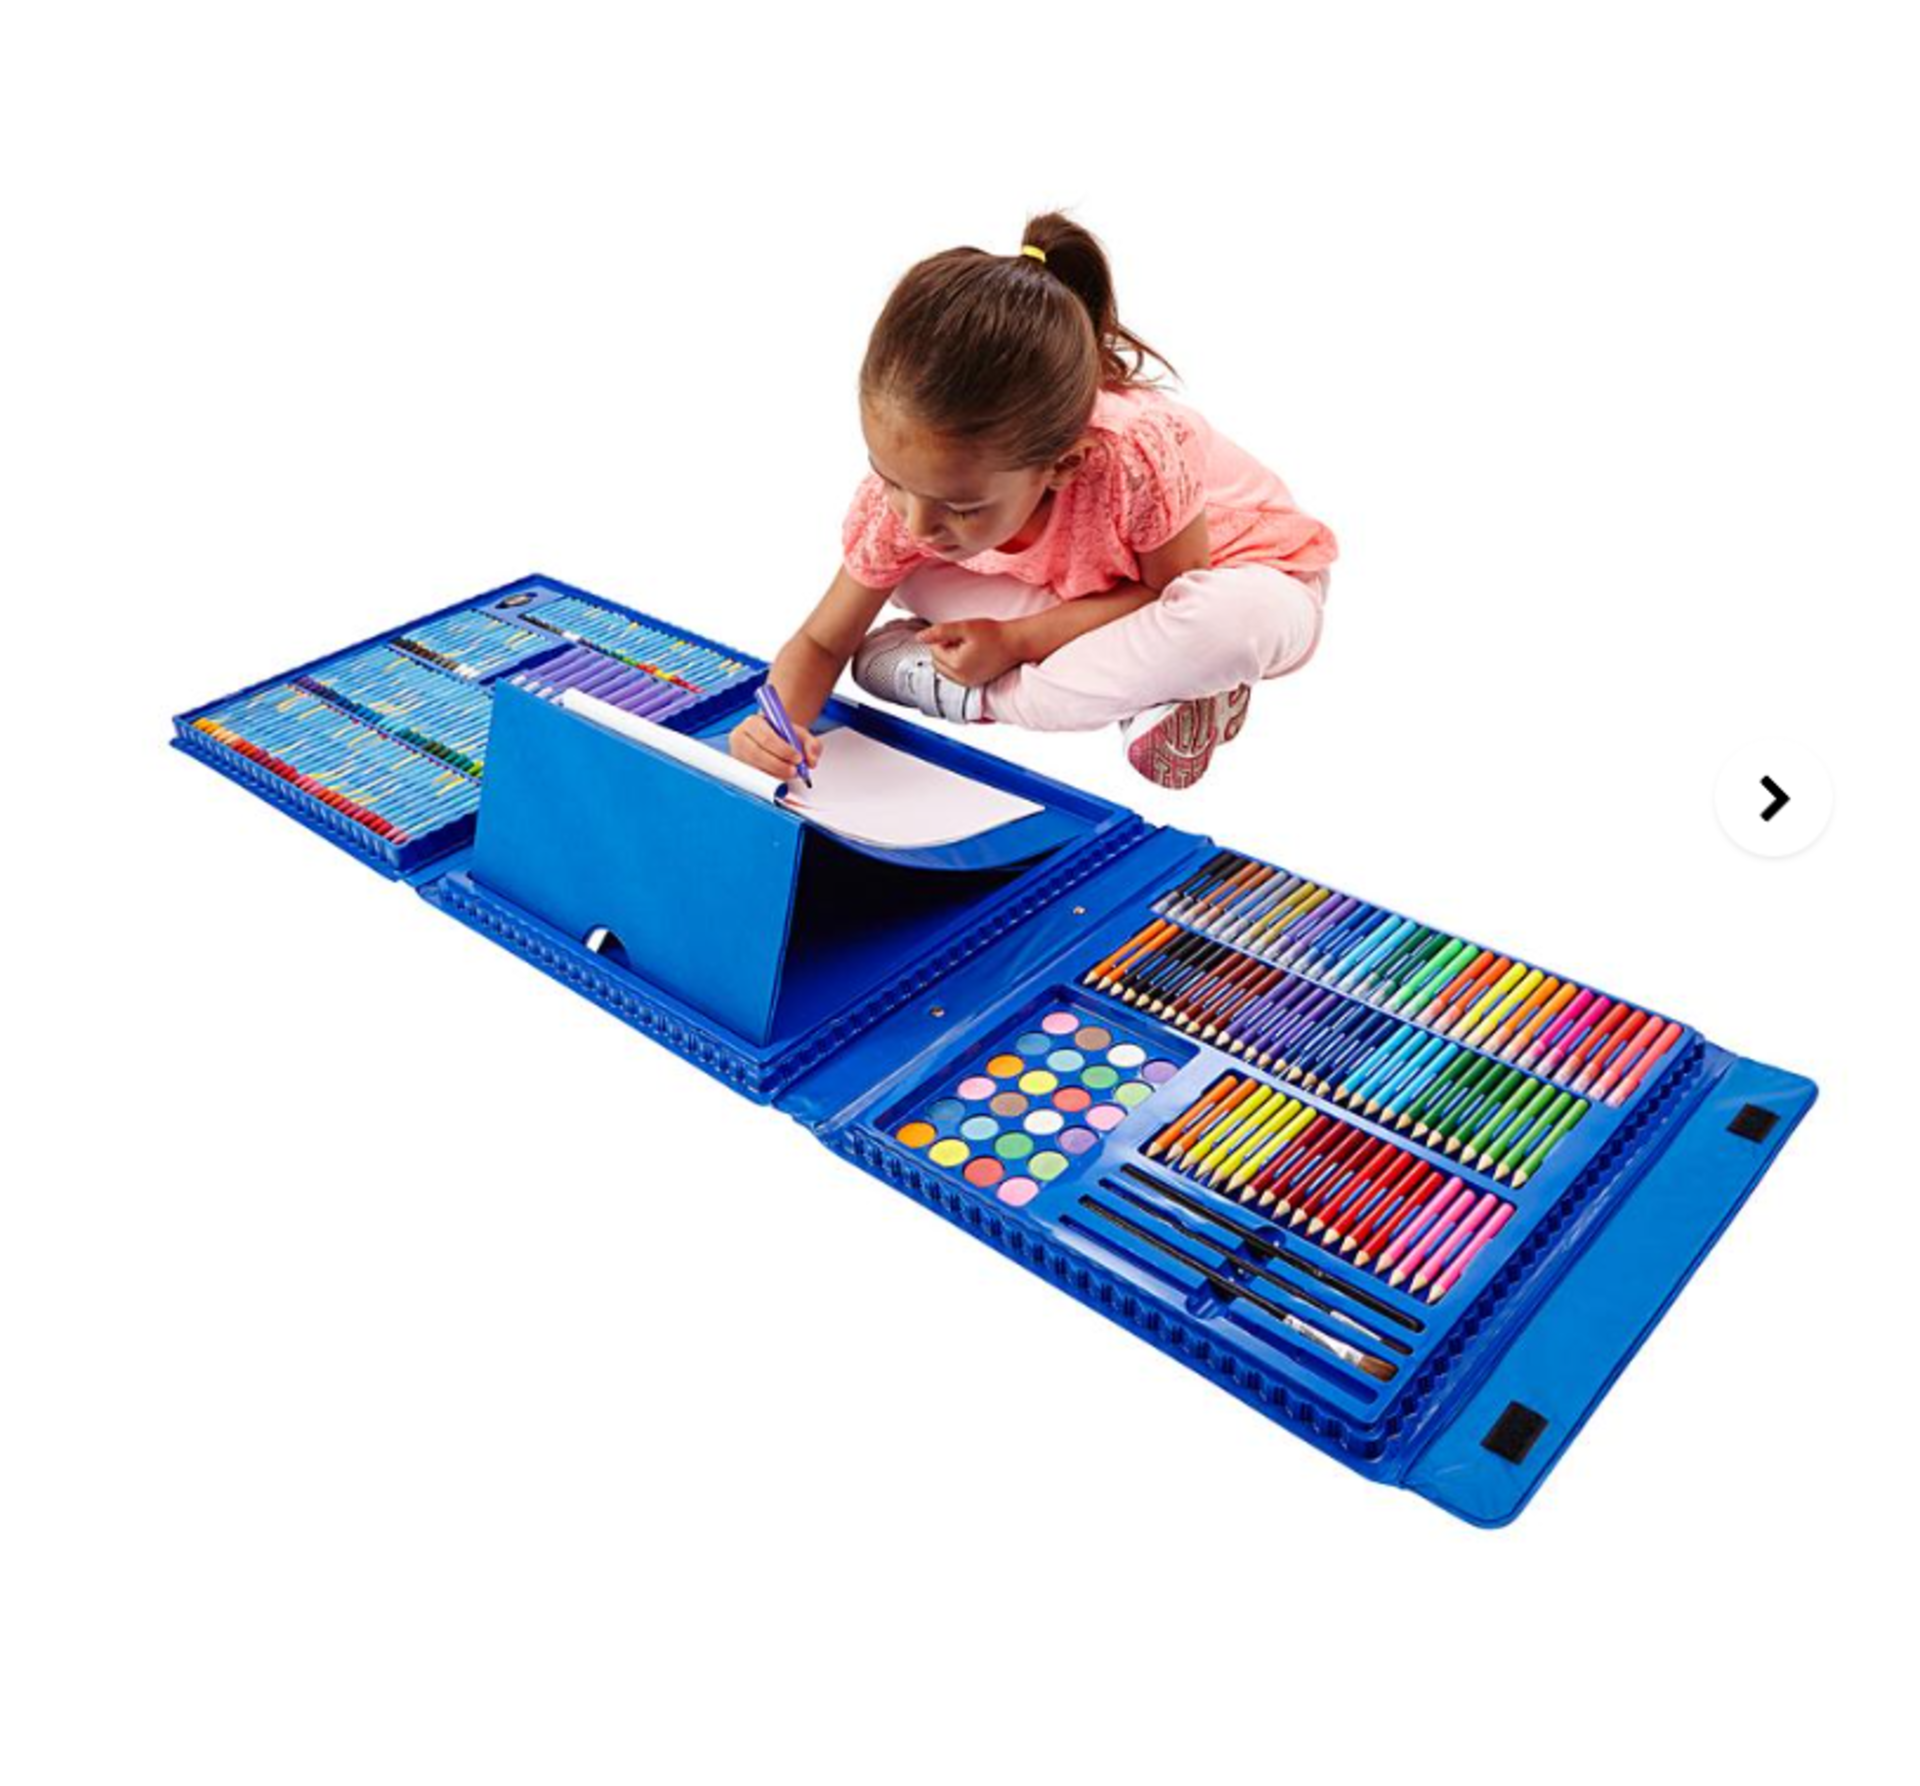 Art Studio Case Ultimate. - ER22. RRP £79.99. The Ultimate Art Studio contains everything your